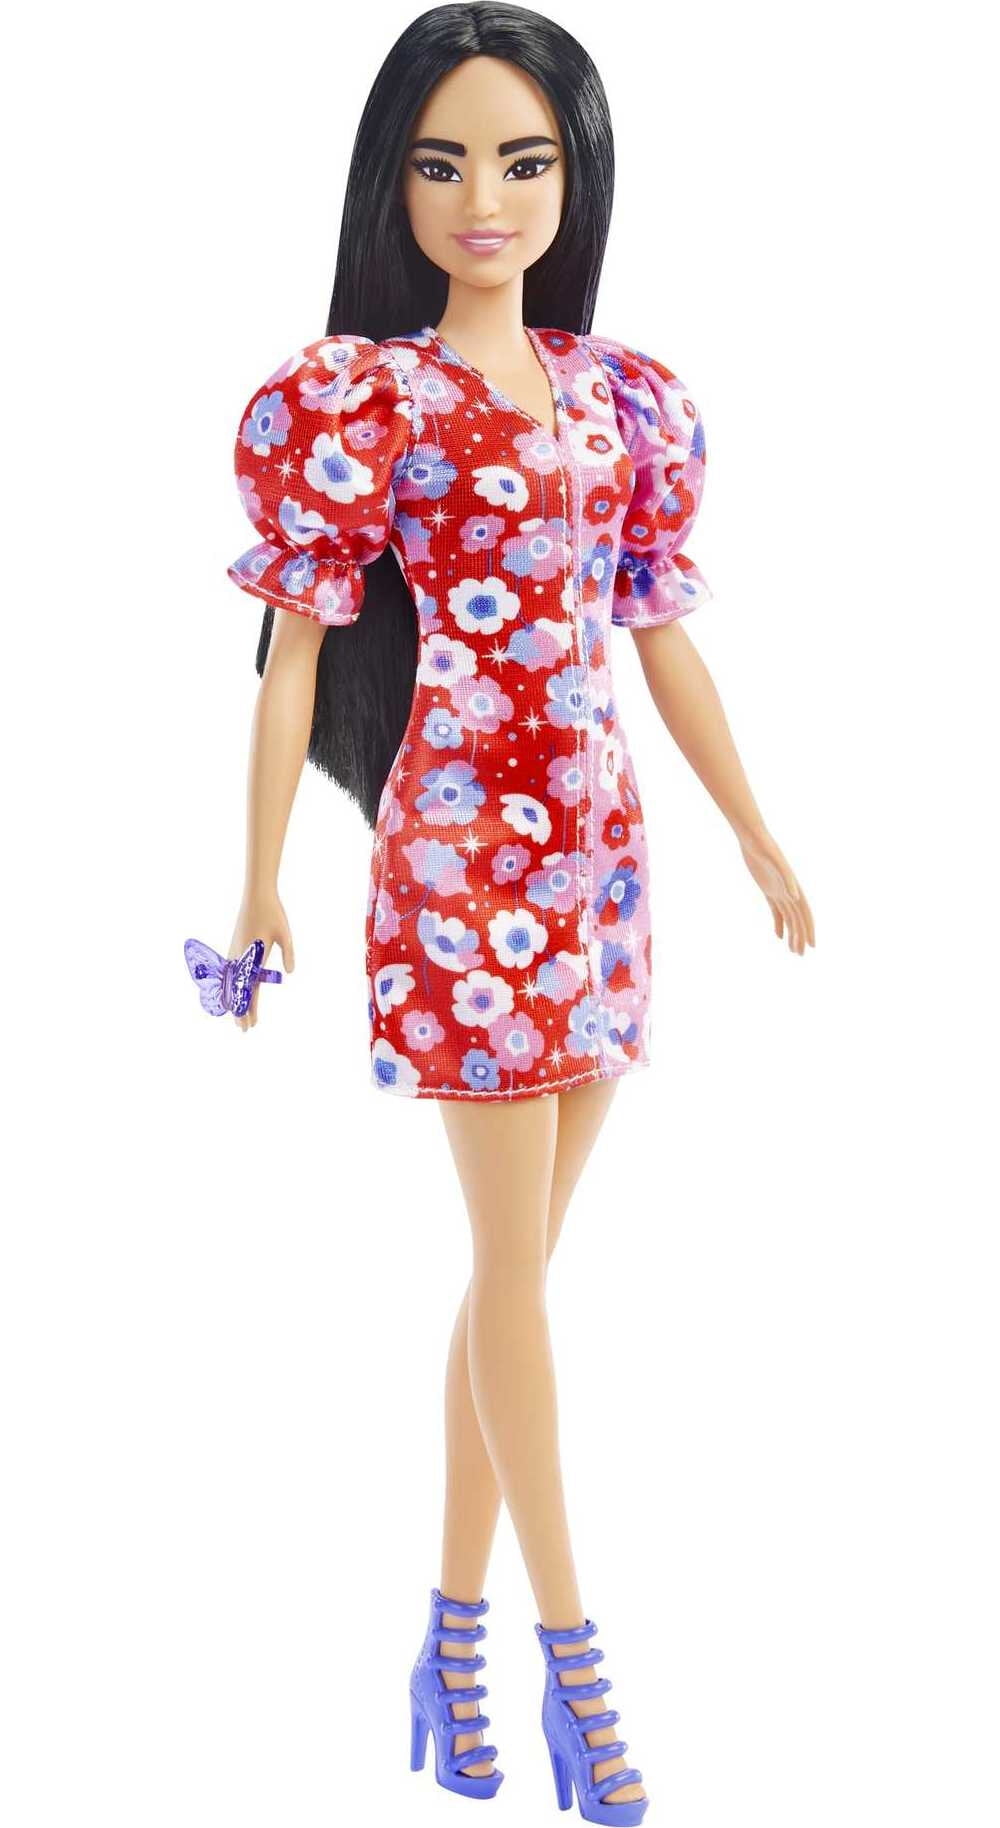 FASHIONISTA ~ DRESS ~ BARBIE DOLL FANCY IN FLOWERS YELLOW FLORAL PRINT COCKTAIL 